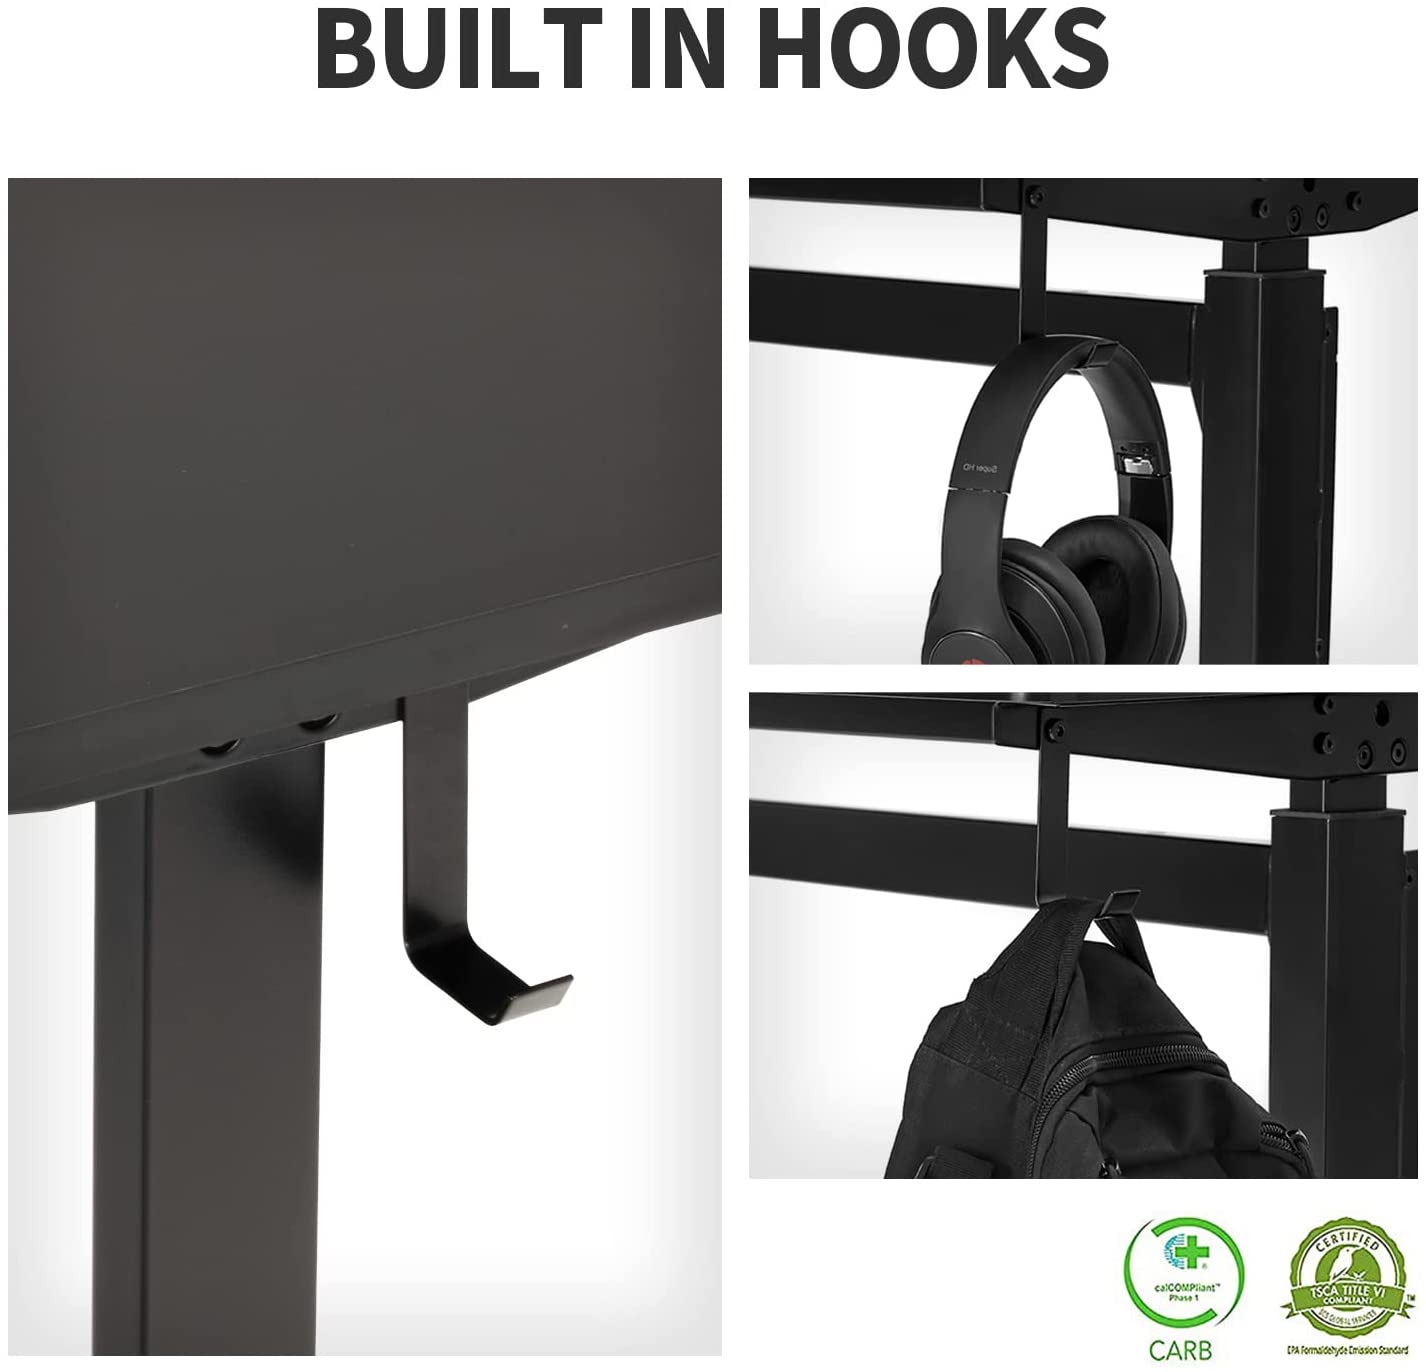 UNICOO - Crank Adjustable Height Standing Desk, Game Table, Home Office Table, Computer Table 55 * 23.6 in Tabletop (XJH-C-55 Black)